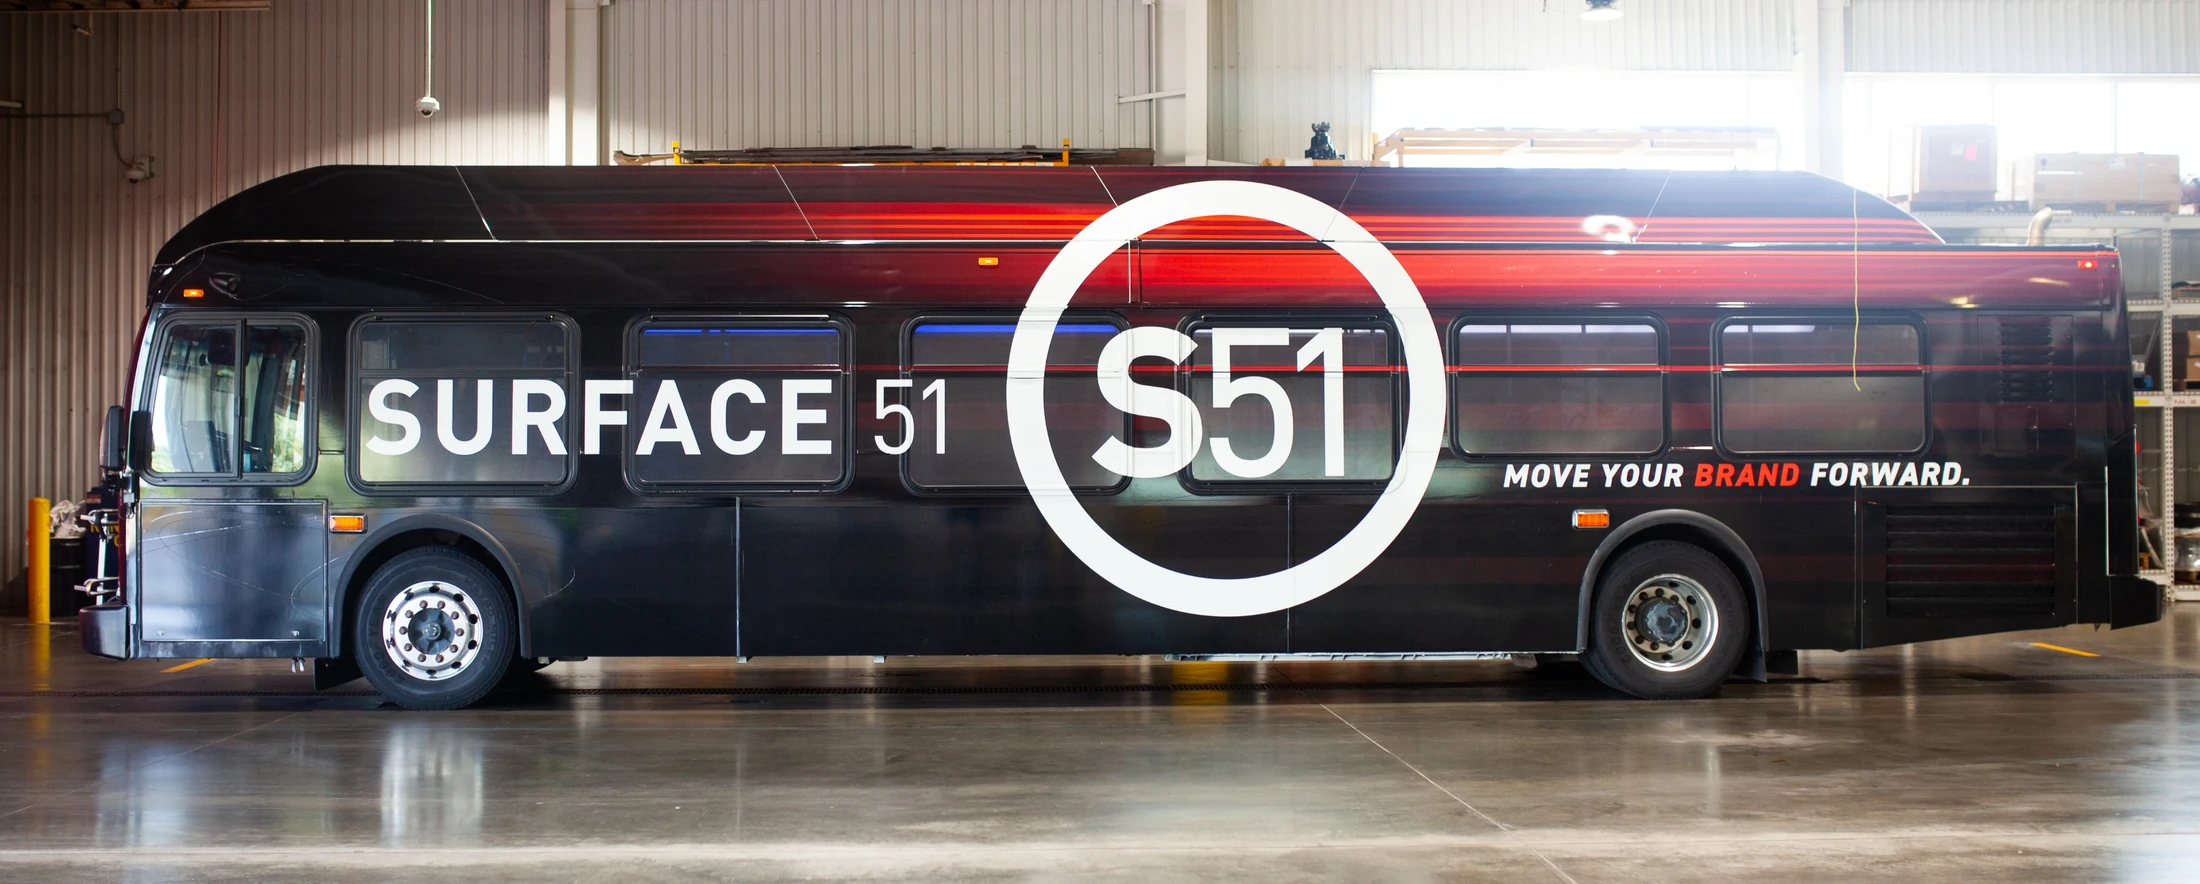 A bus in a warehouse with the words surface 55 on it.